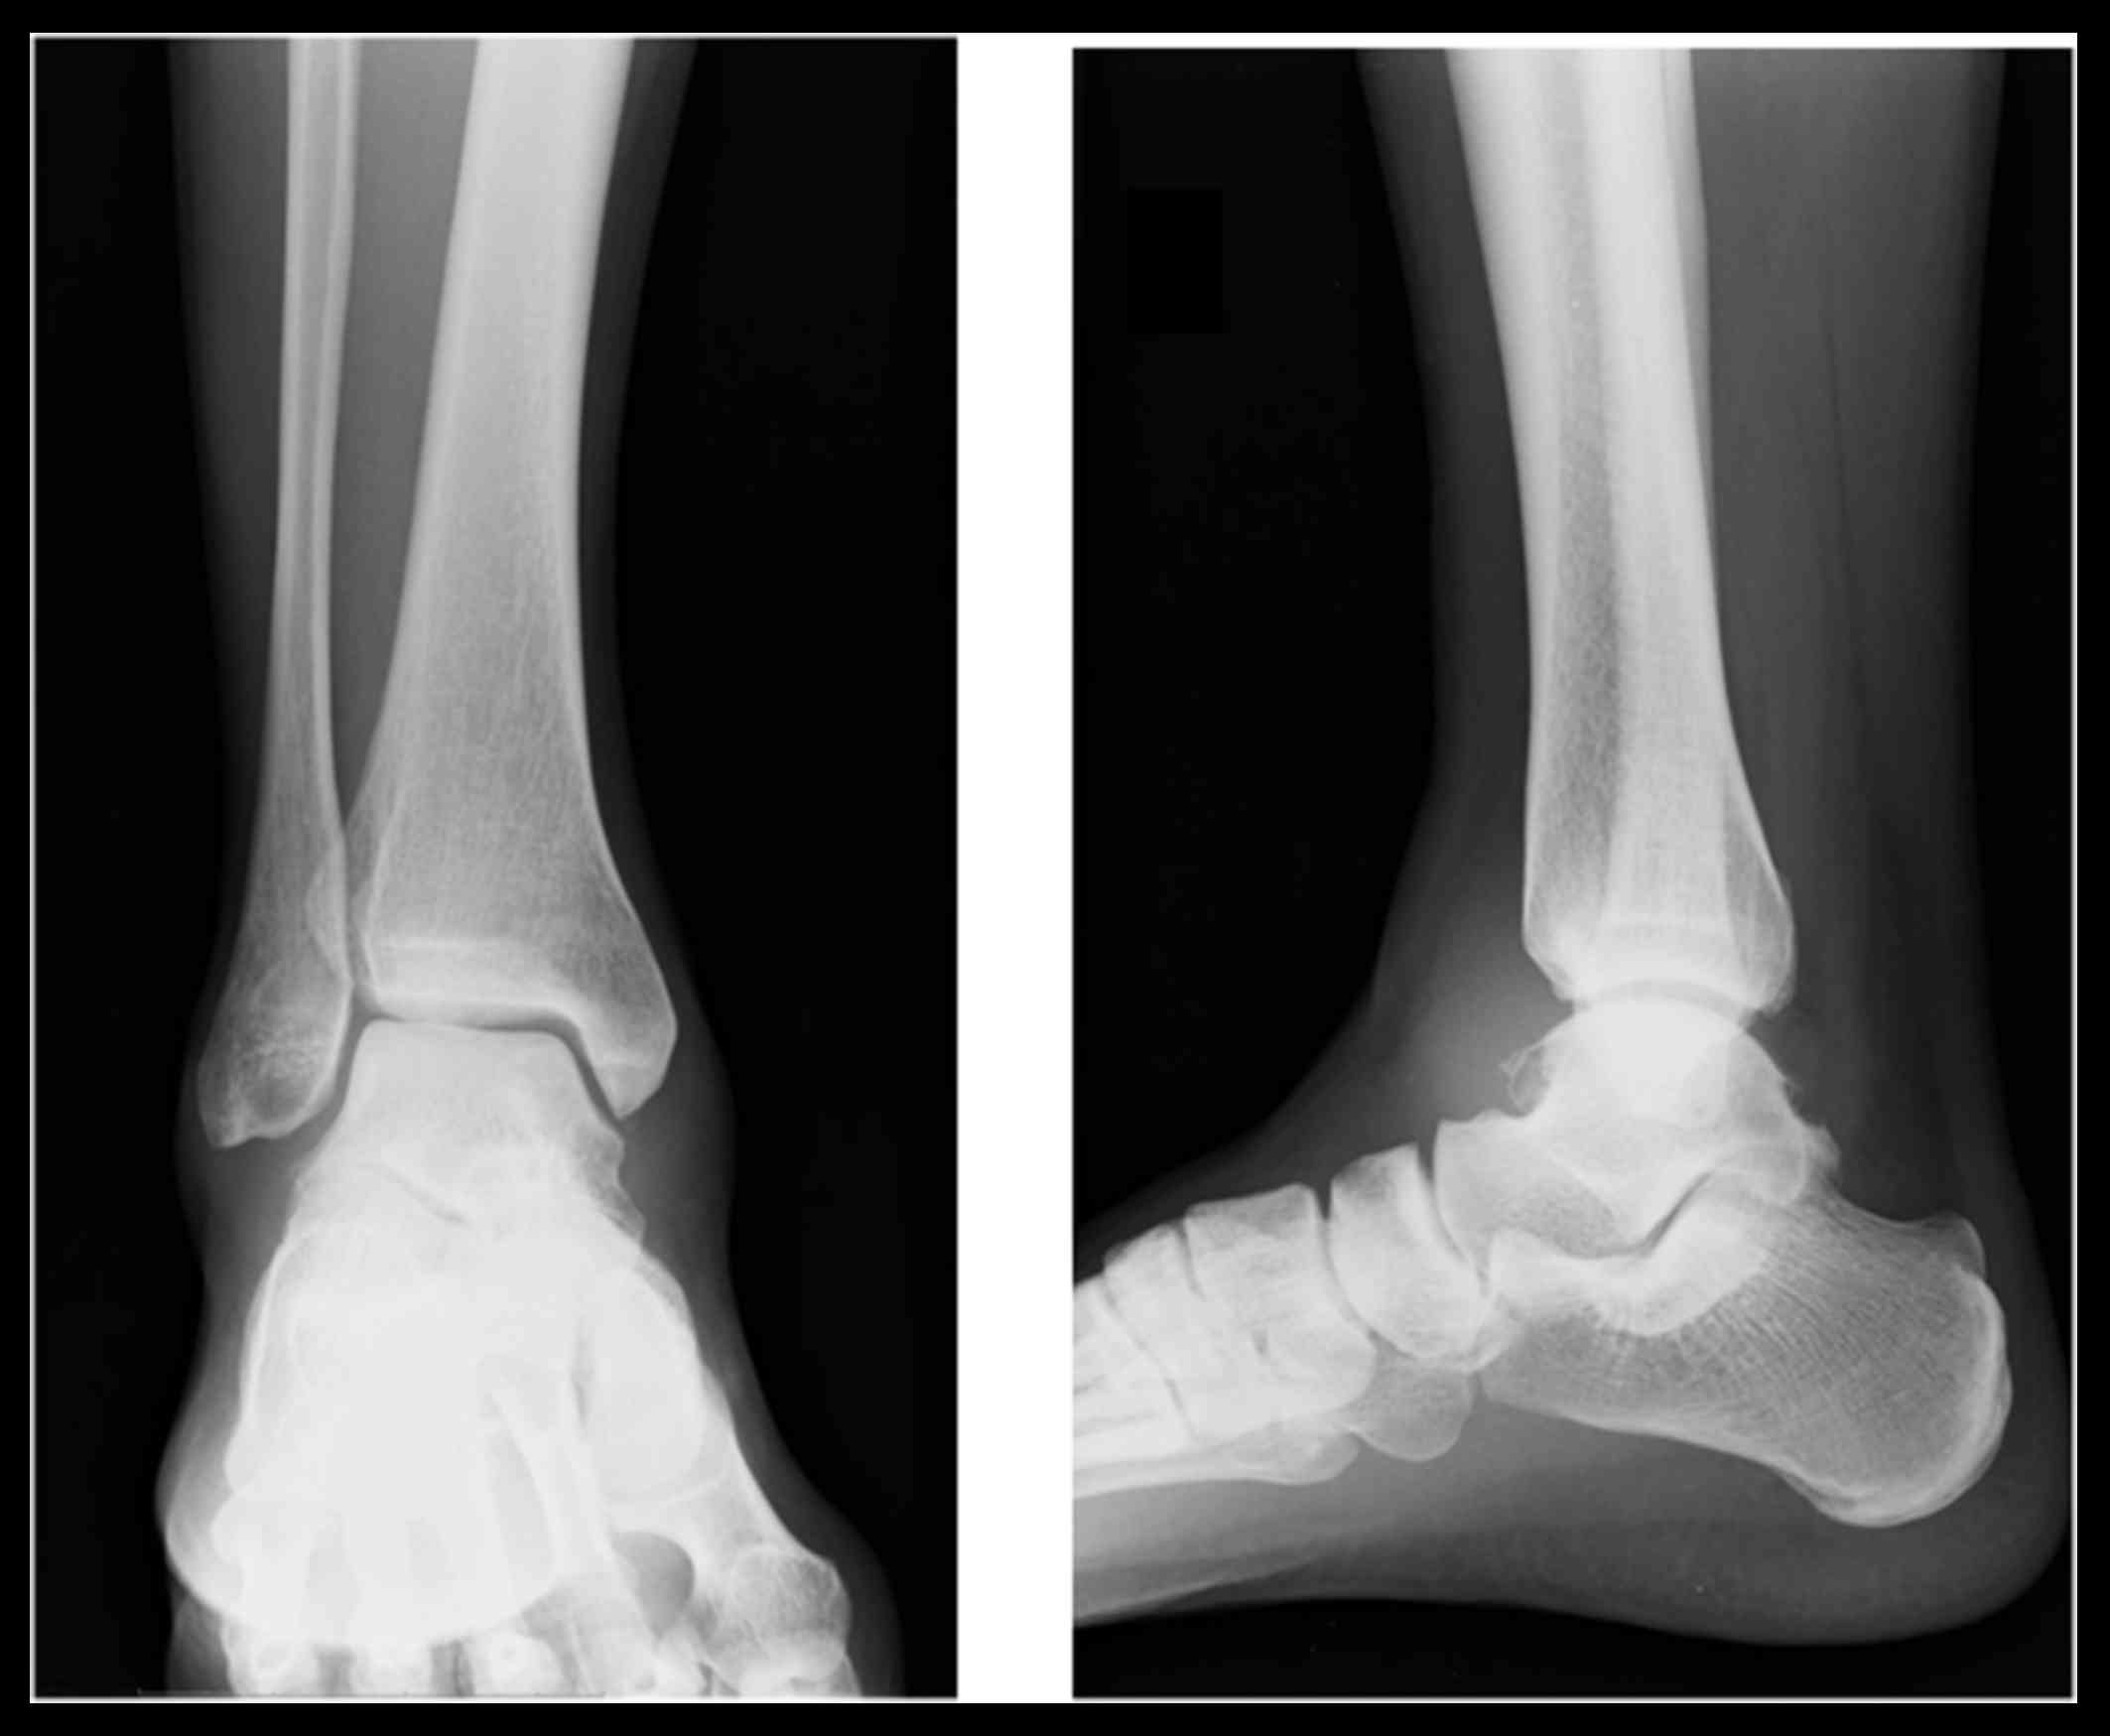 sarcoma cancer in ankle